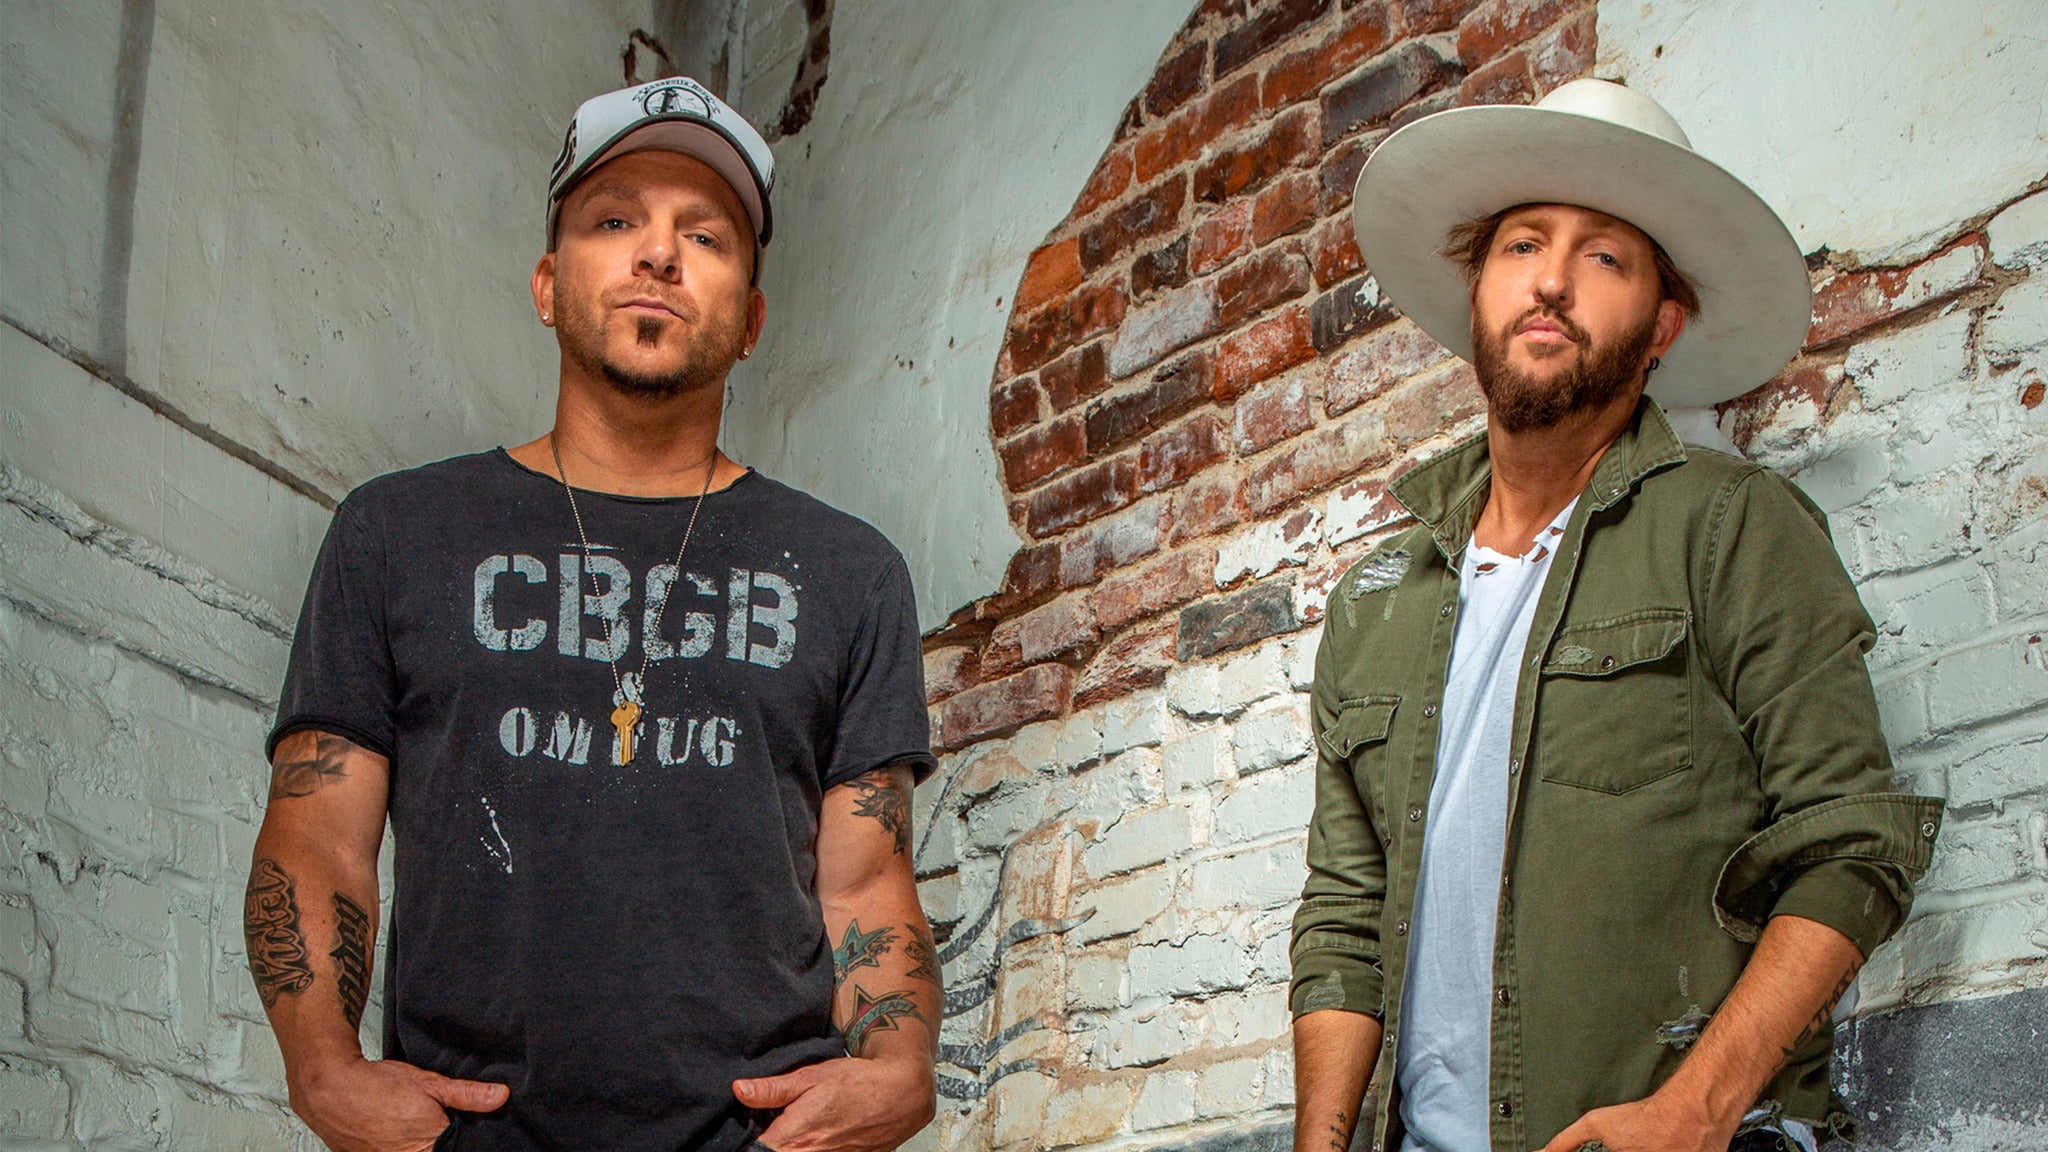 LOCASH presale password for early tickets in Deadwood